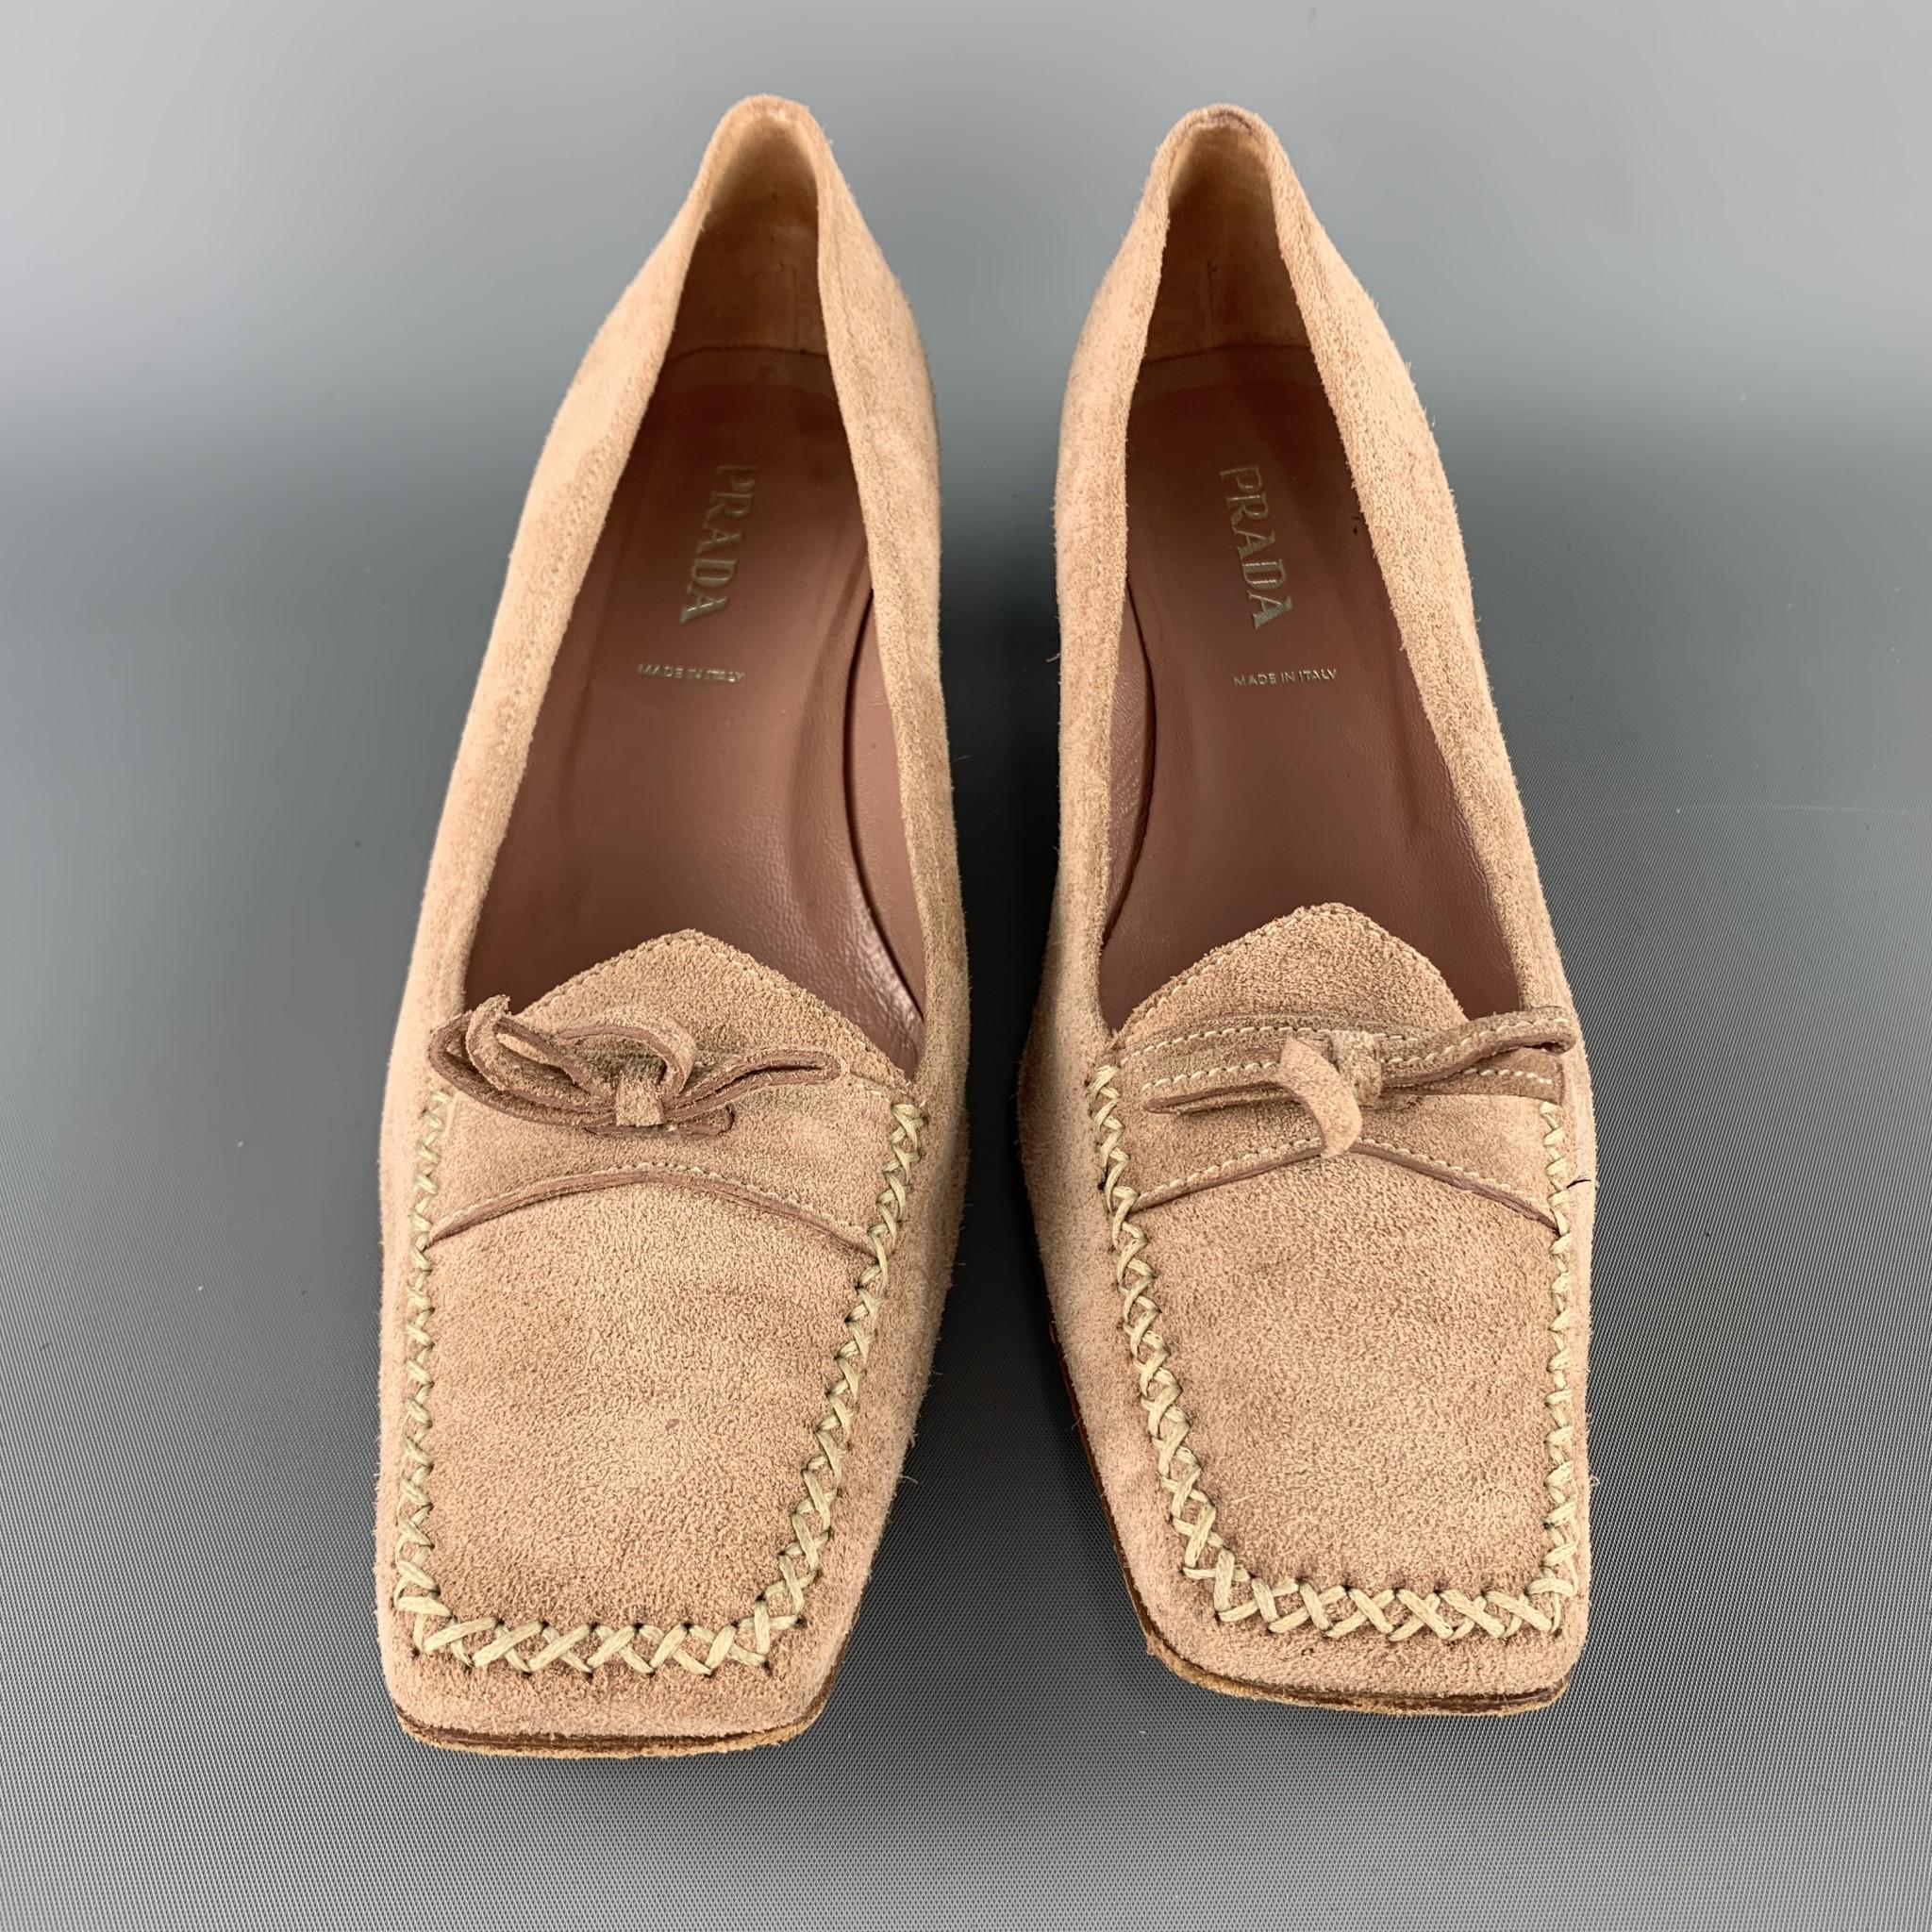 PRADA pumps come in light taupe beige suede with a contrast stitch squared apron toe, bow tie loafer strap, and kitten heel. Made in Italy.

Good Pre-Owned Condition.
Marked: IT 39.5

Heel: 1.5 in. 